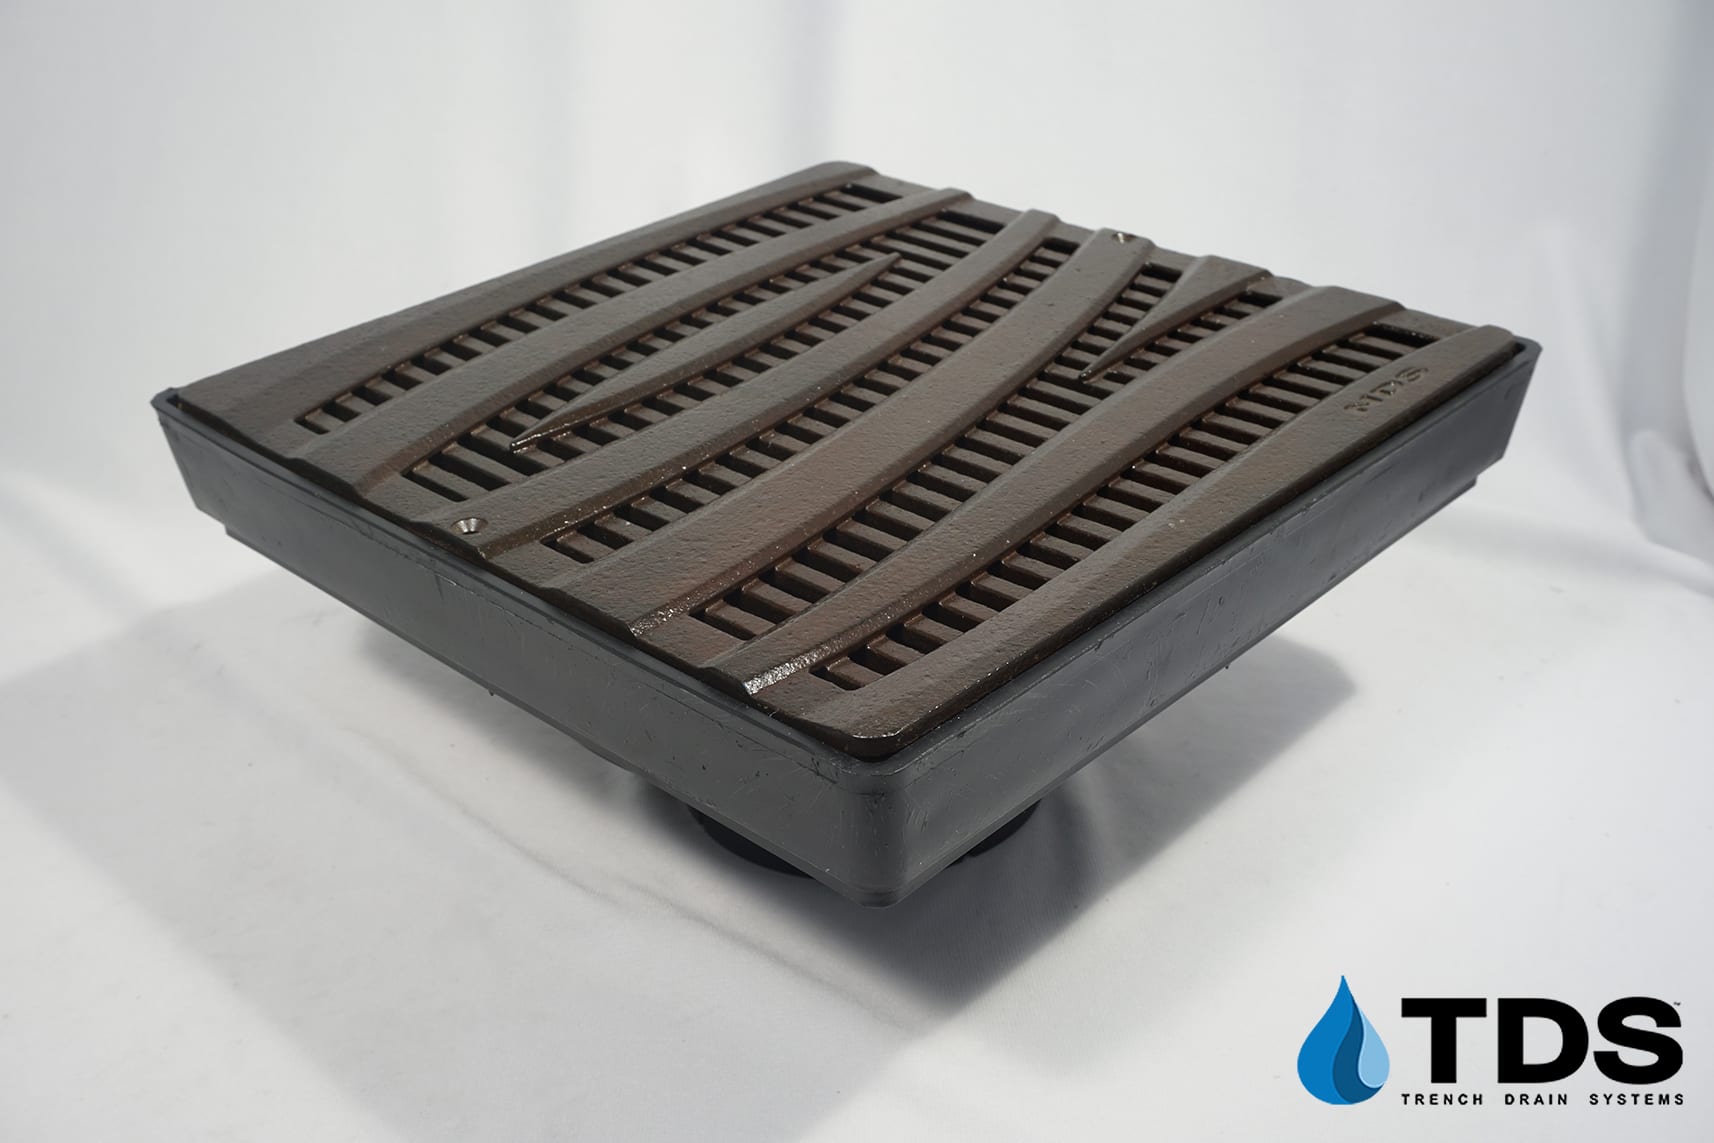 https://plastictrenchdrain.com/wp-content/uploads/2013/03/NDS-Low-Profile-Catch-Basin-with-Wave-Pattern-Grate-web.jpg